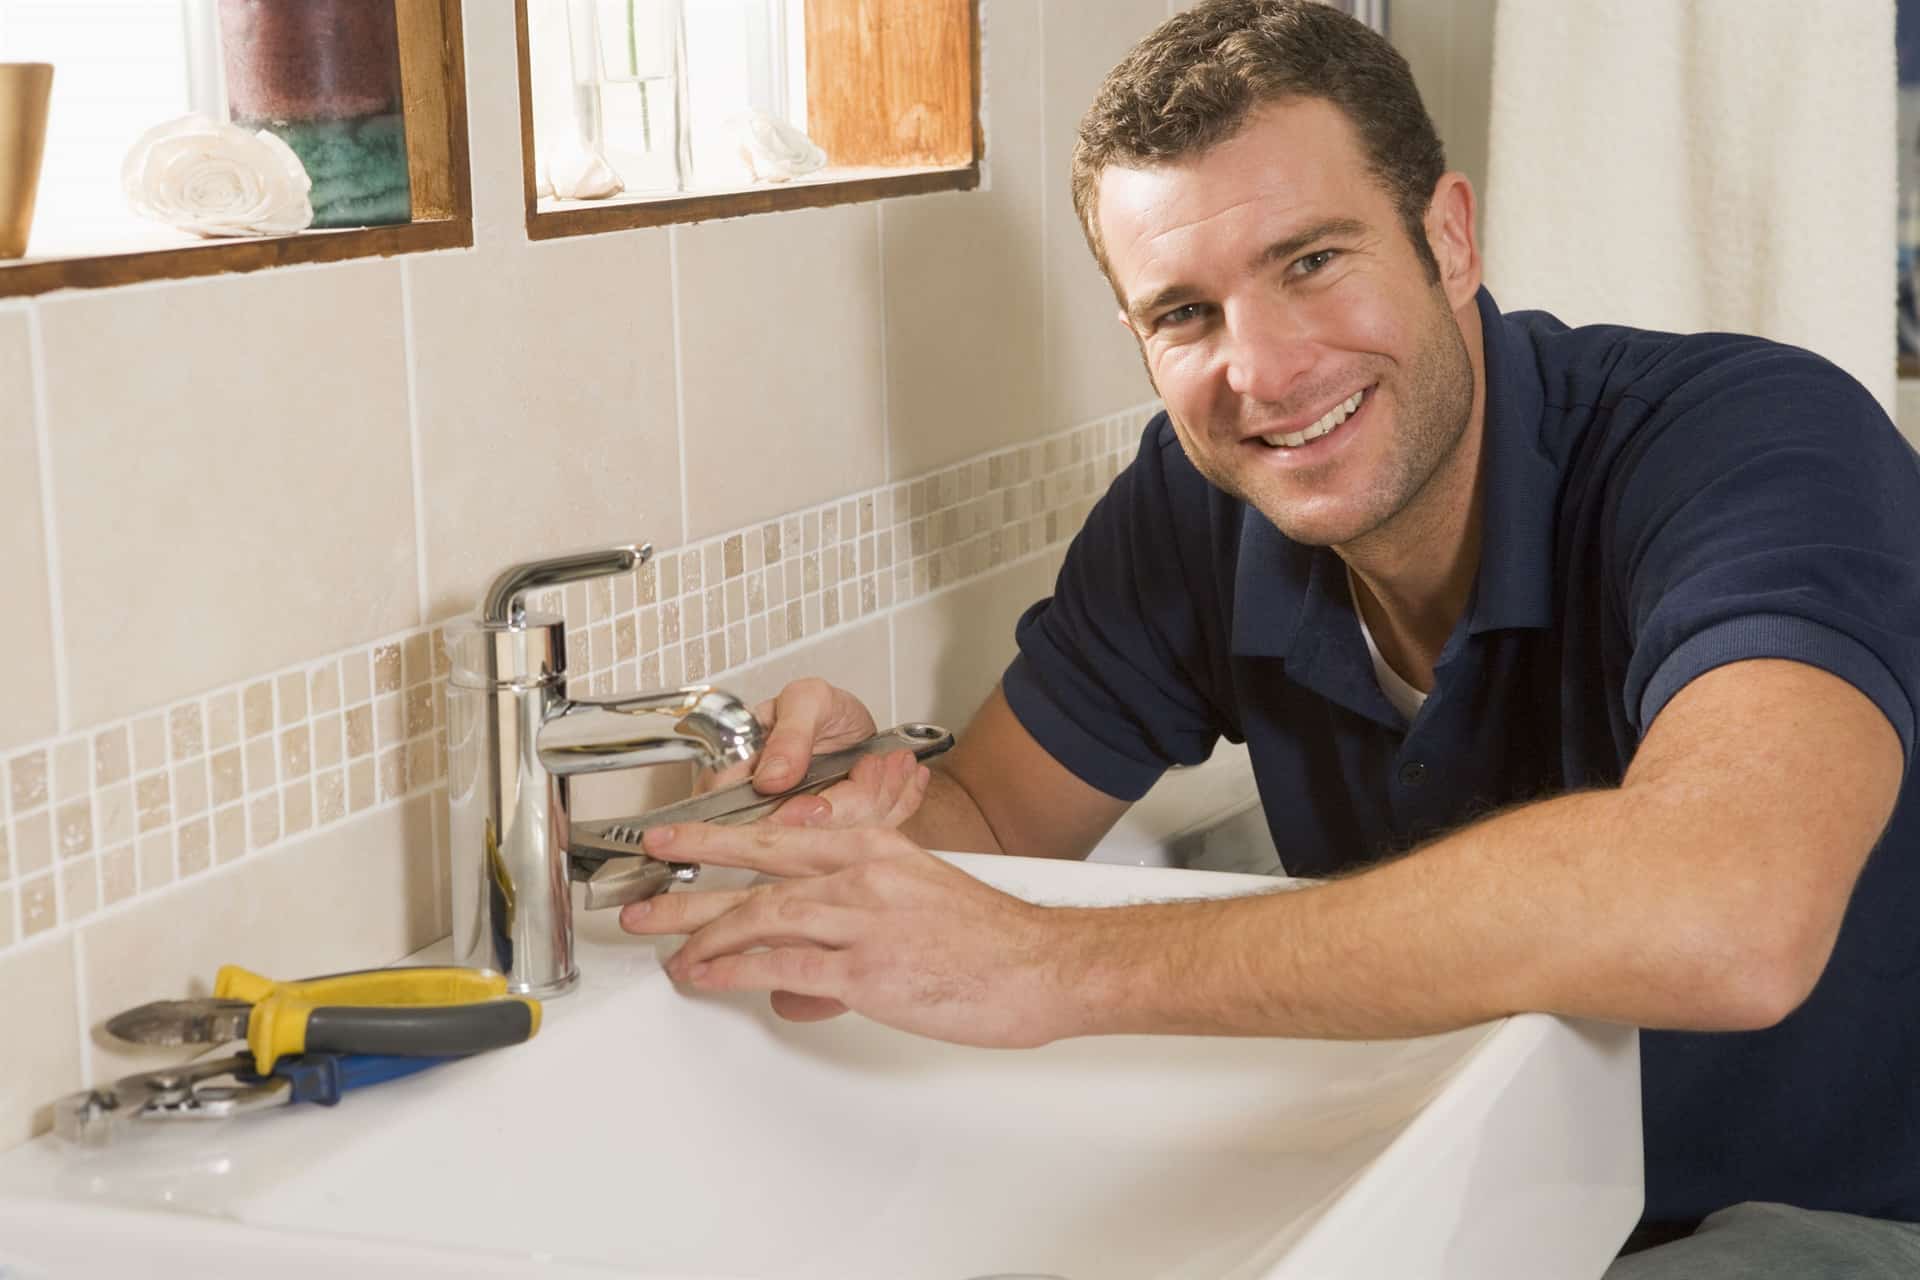 lavatory sink faucet installation and repair provided by Wrench It Up plumbing and mechanical